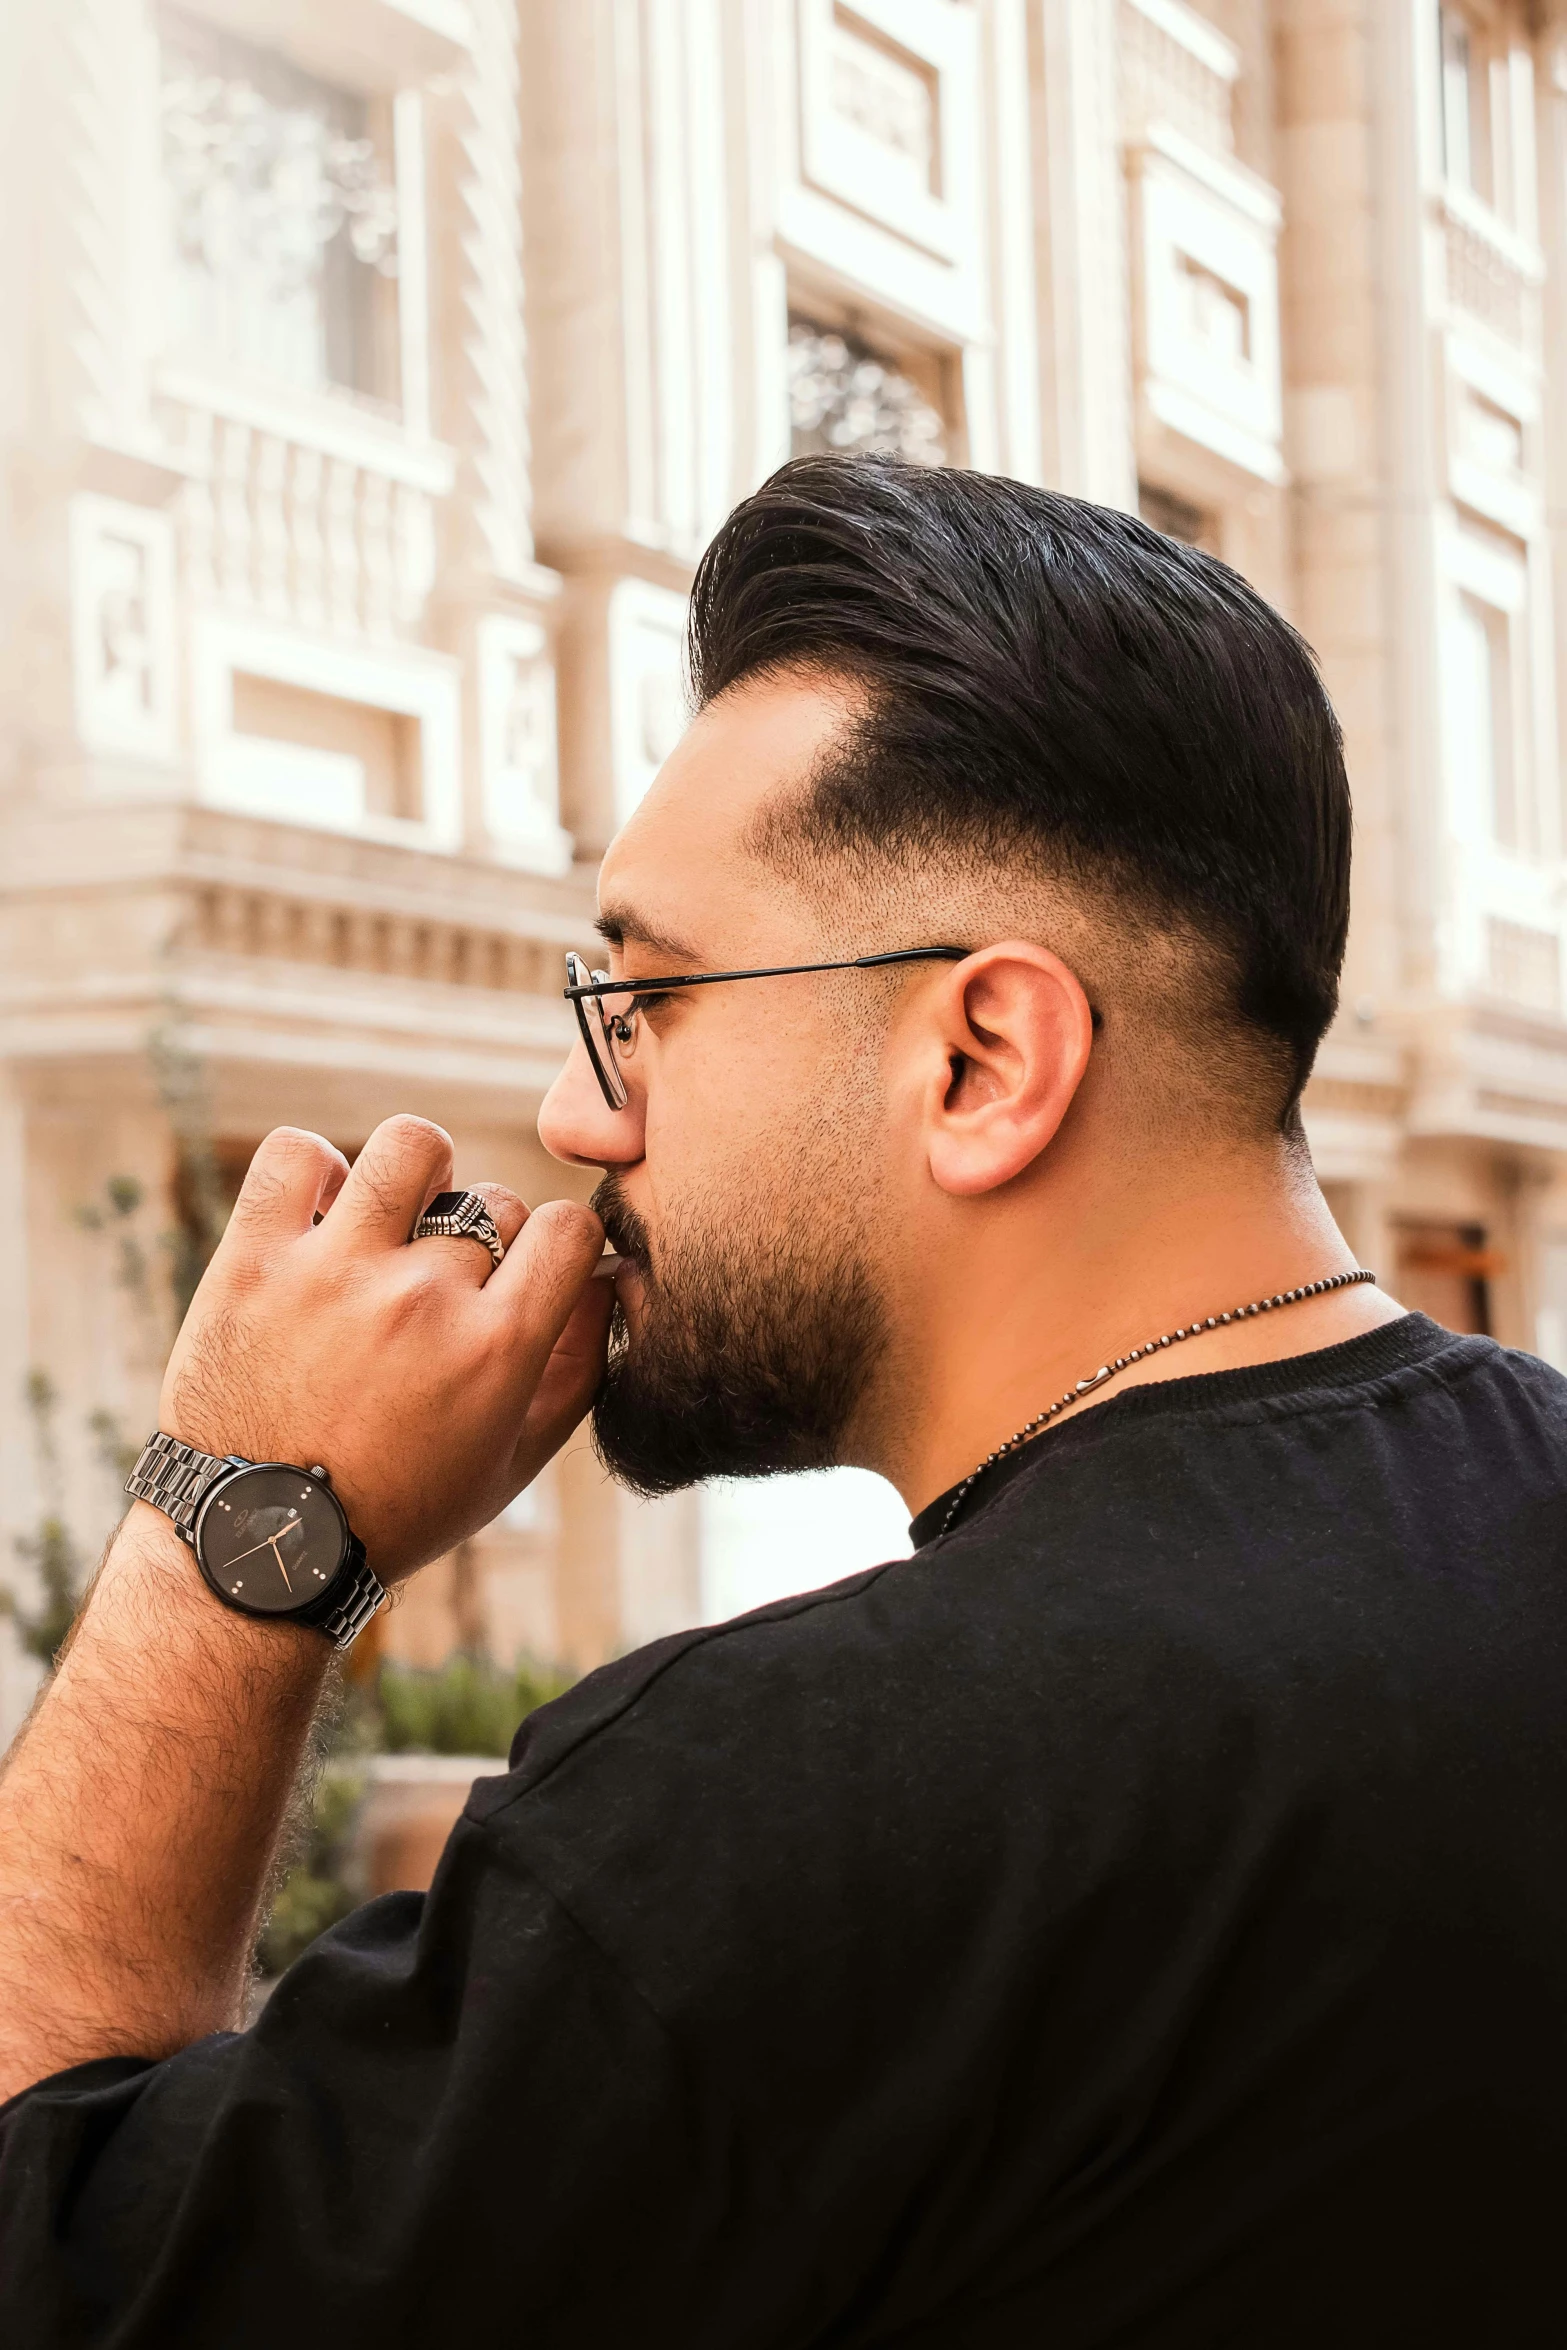 a man is smoking with a watch on his left hand